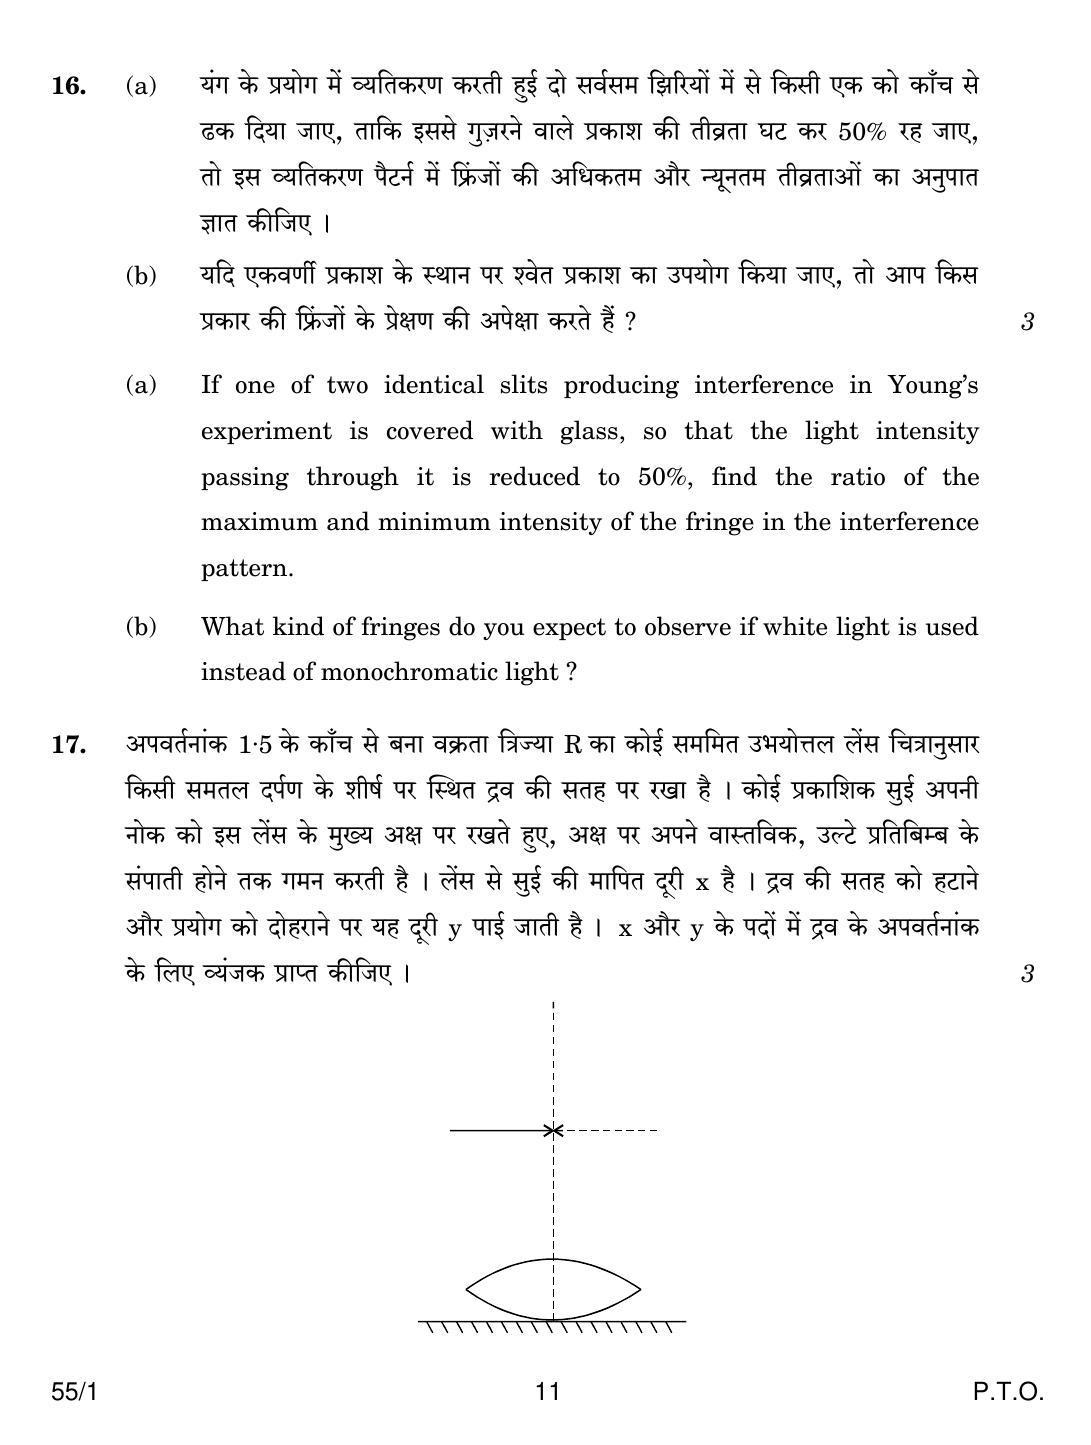 CBSE Class 12 55-1 PHYSICS 2018 Question Paper - Page 11